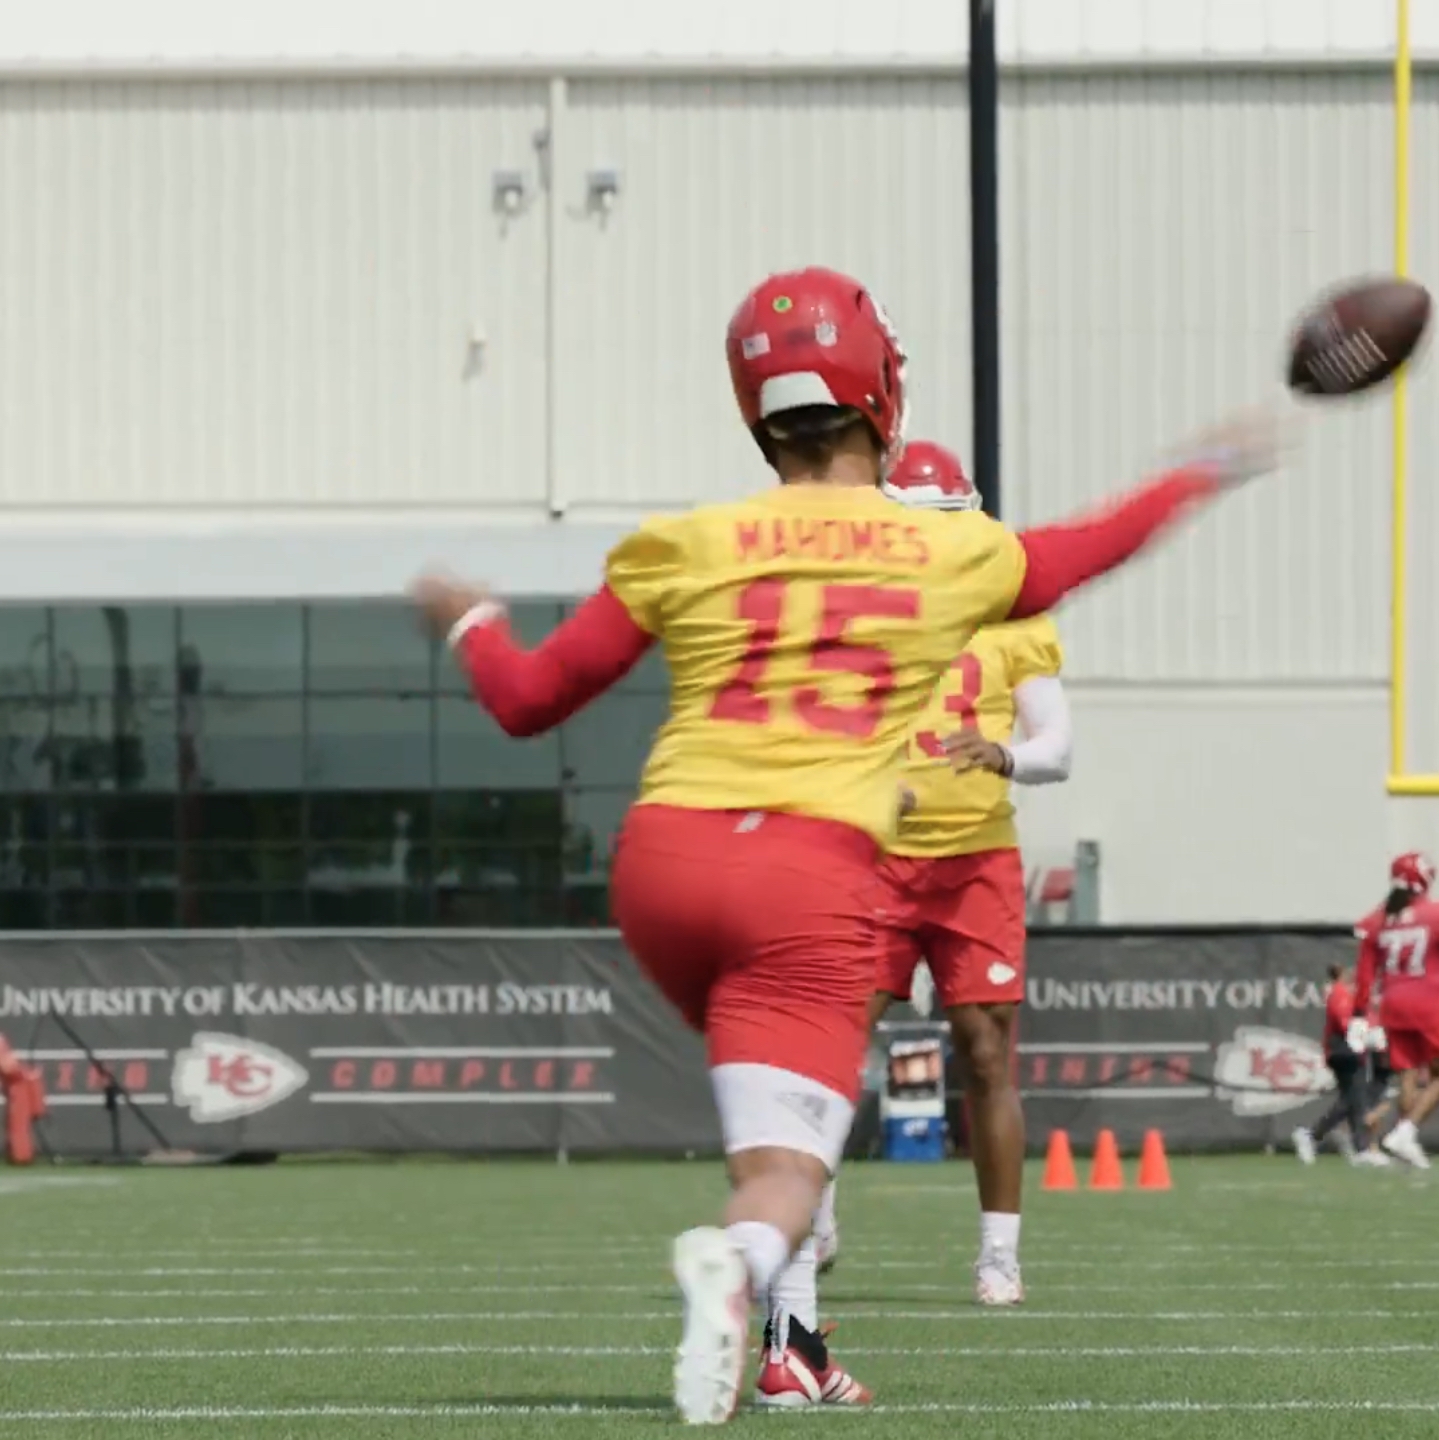 NFL Fans Can't Stop Laughing as Patrick Mahomes Channels His Inner